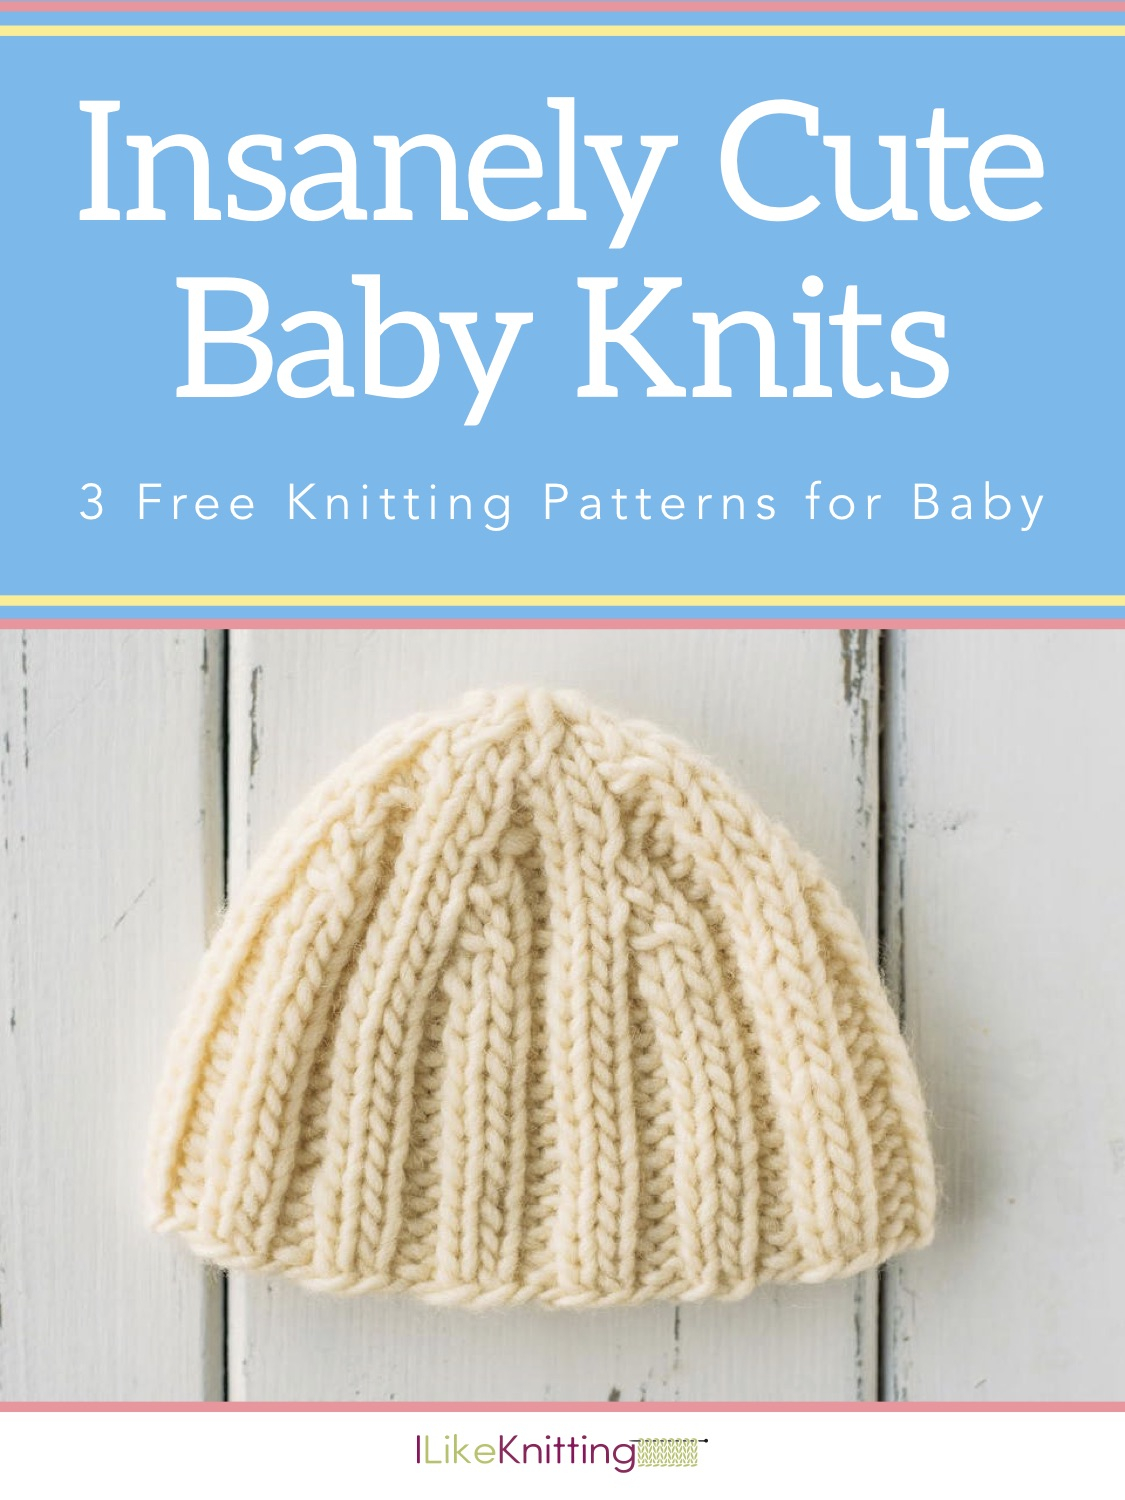 Free Knitting Patterns Download Insanely Cute Ba Knits 3 Free Knitting Patterns For Ba I Like